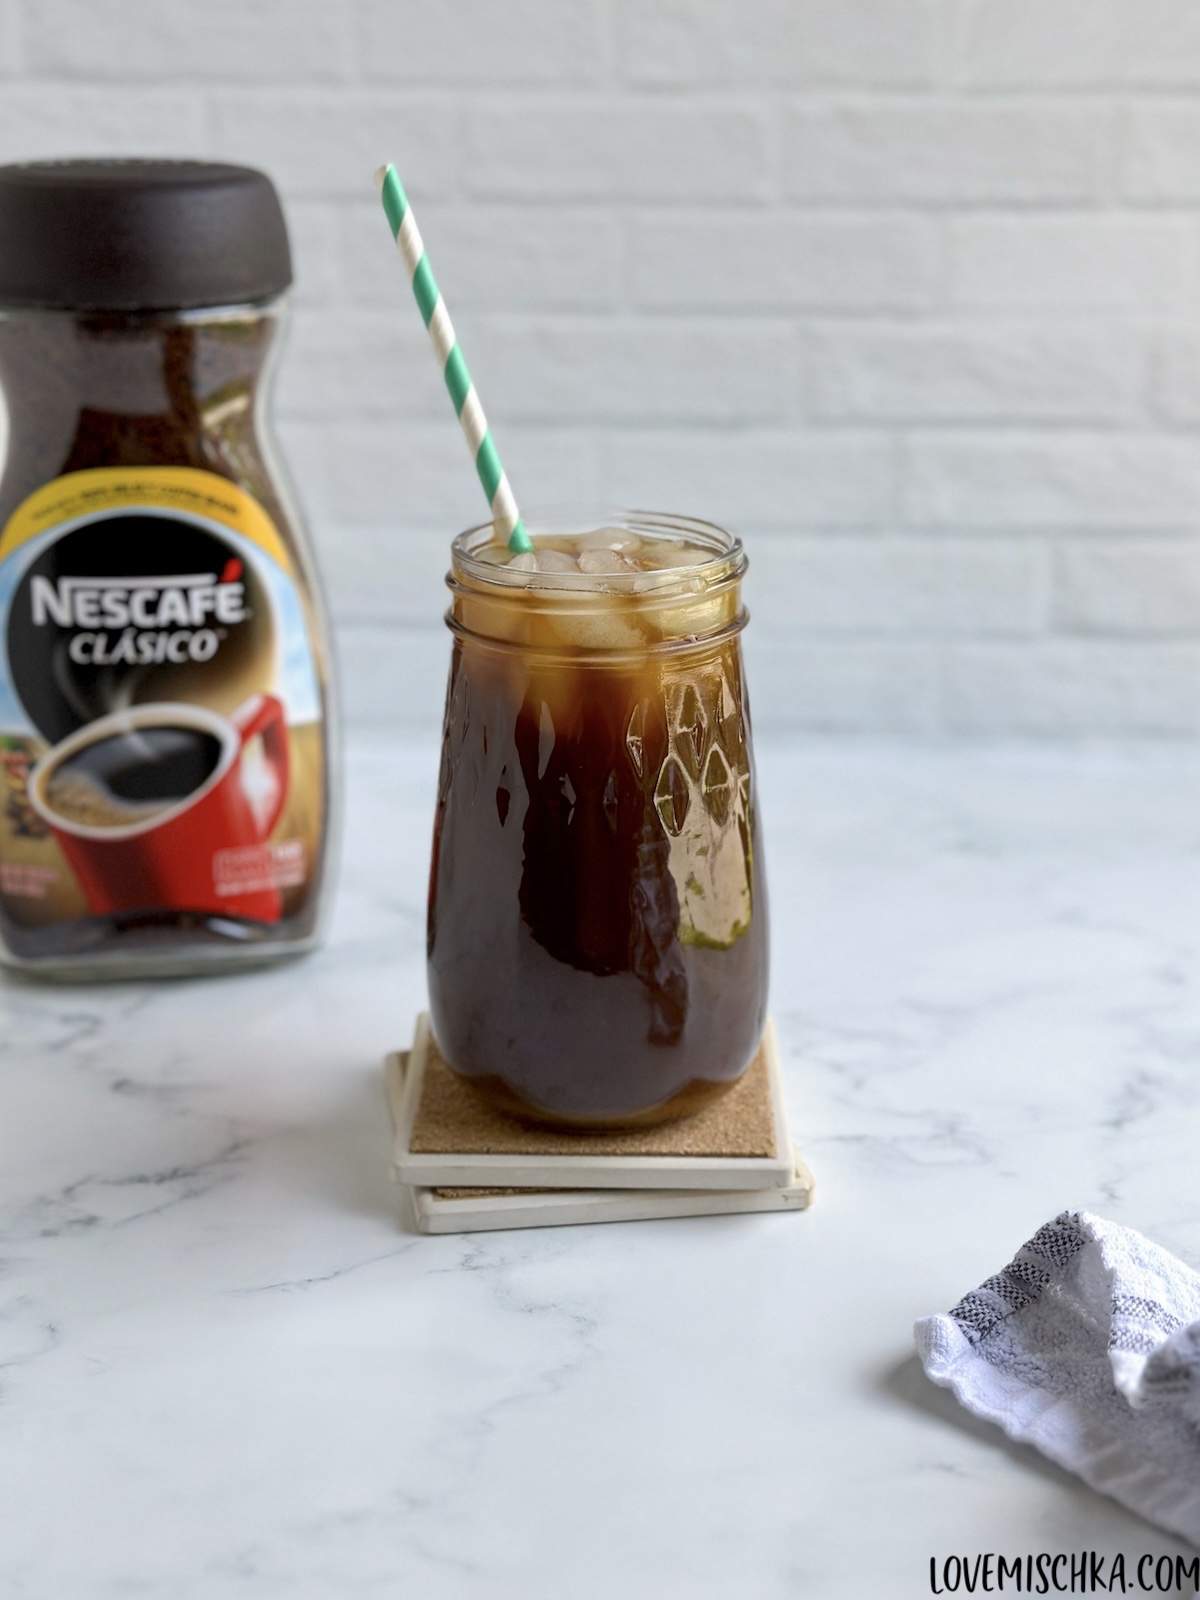 Maxwell House Foaming Instant Iced Latte